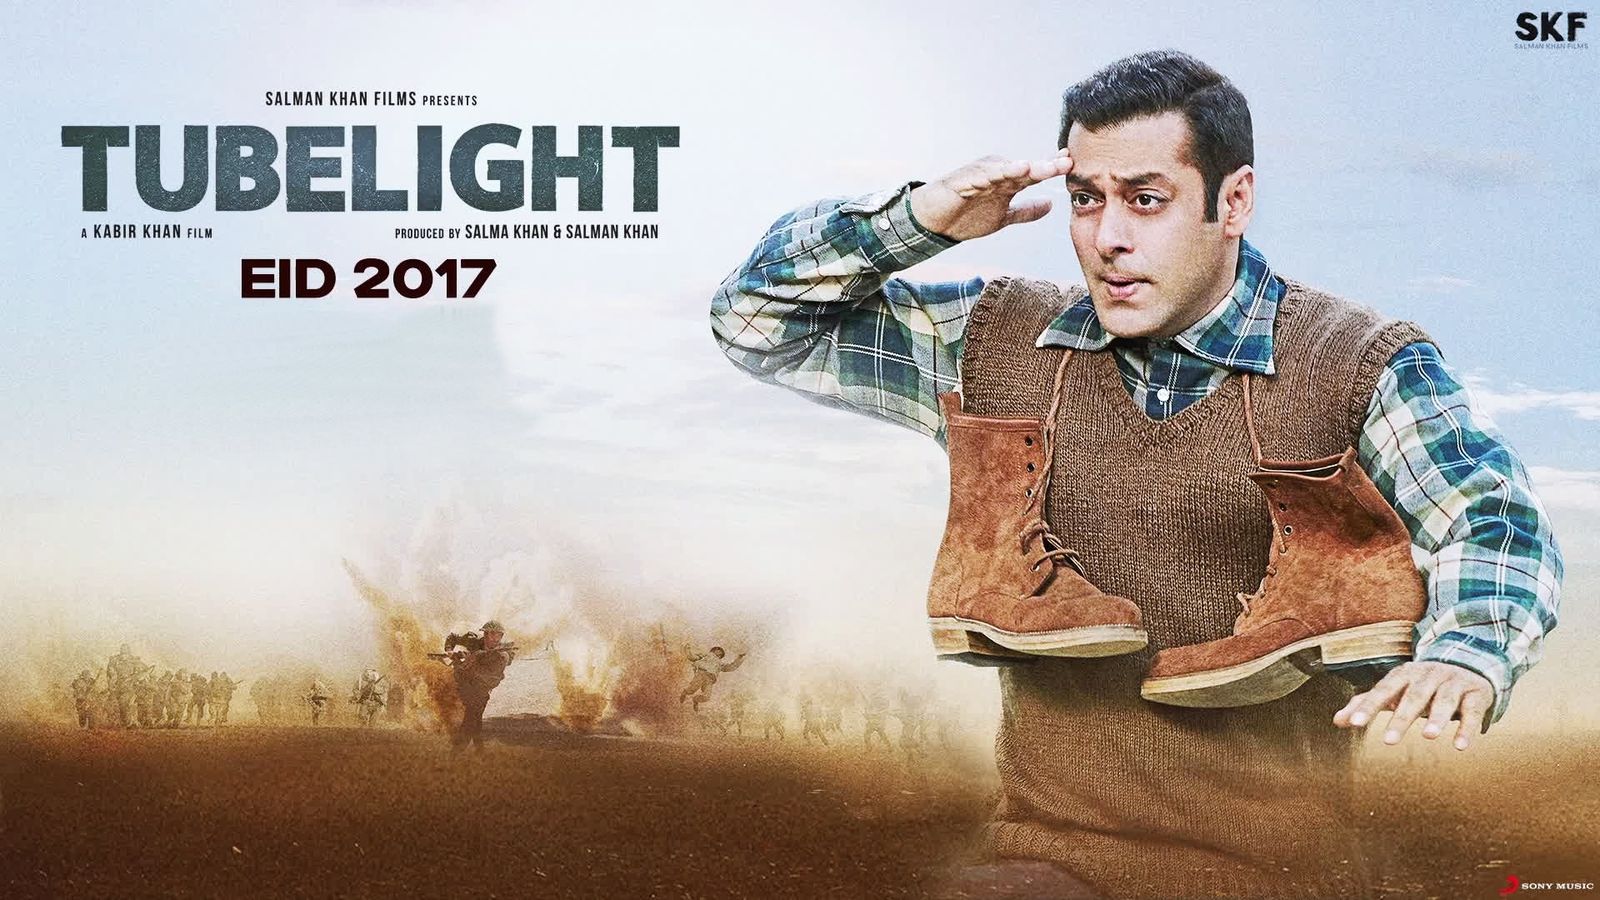 Tubelight To Have 'Short' Run Time